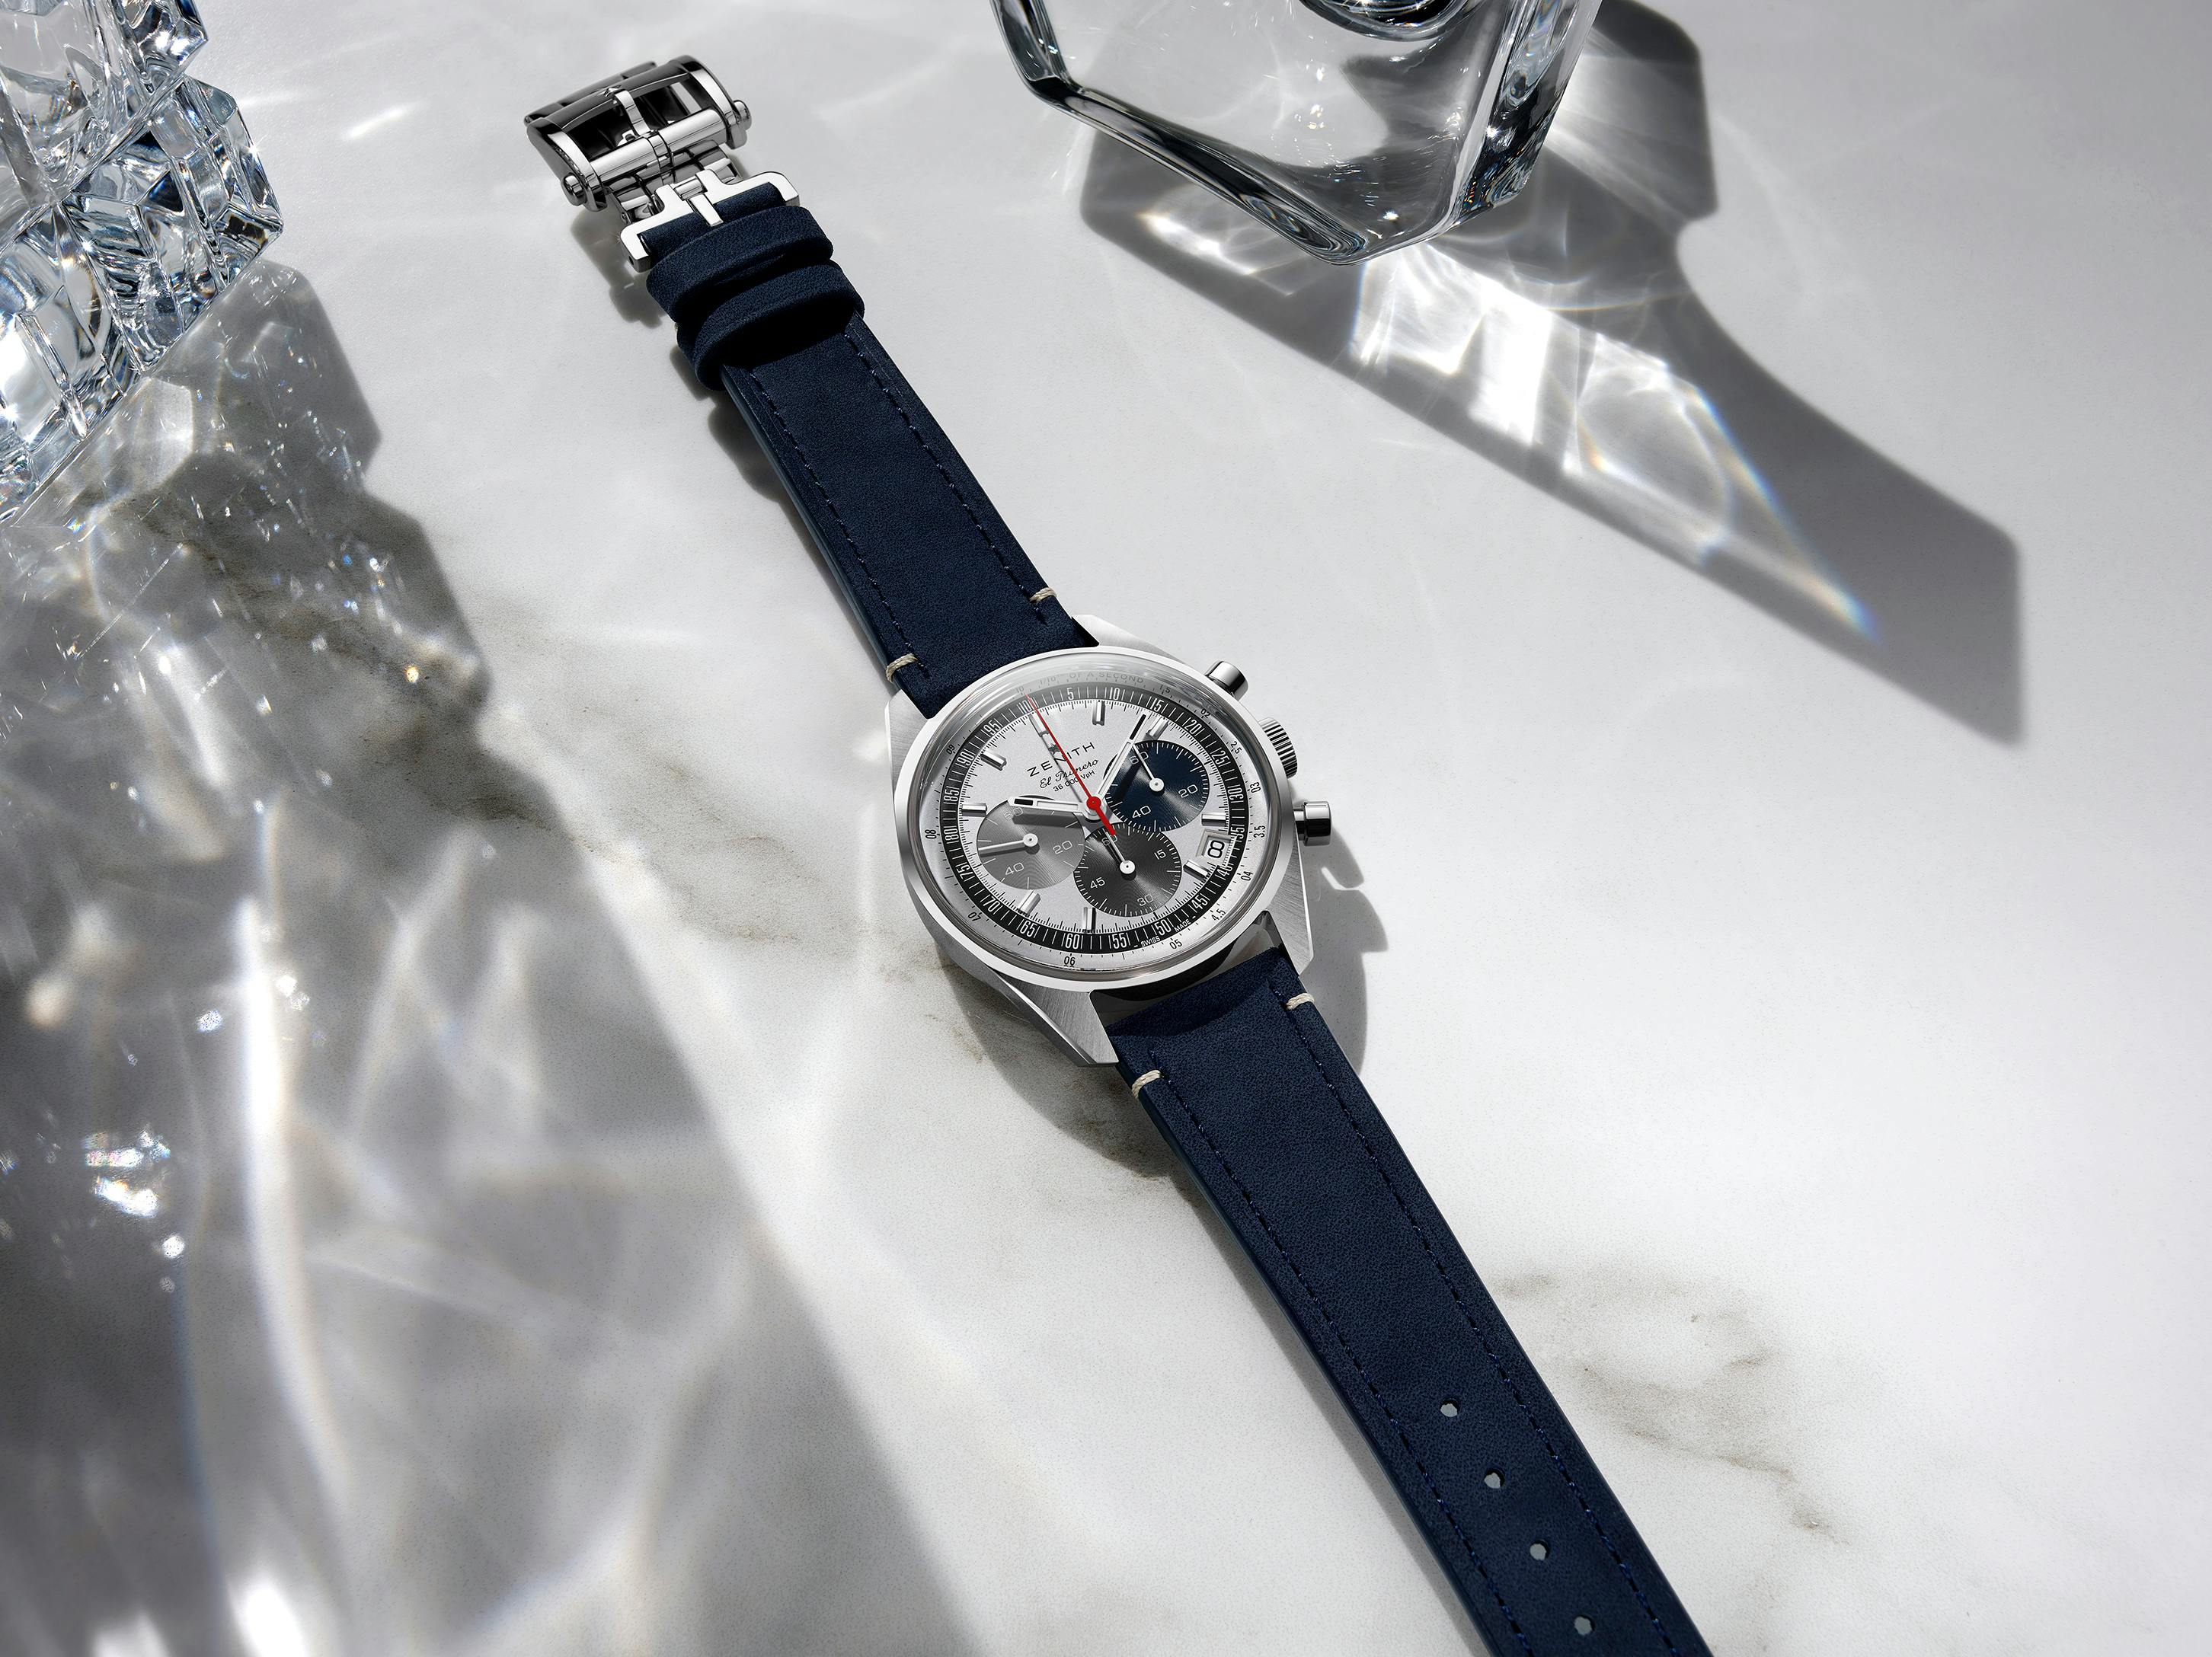 THE LONG-AWAITED SUCCESSOR TO THE A386 IS FINALLY HERE: ZENITH PRESENTS THE CHRONOMASTER ORIGINAL – THE 21ST CENTURY RENDITION OF THE MOST ICONIC EL PRIMERO